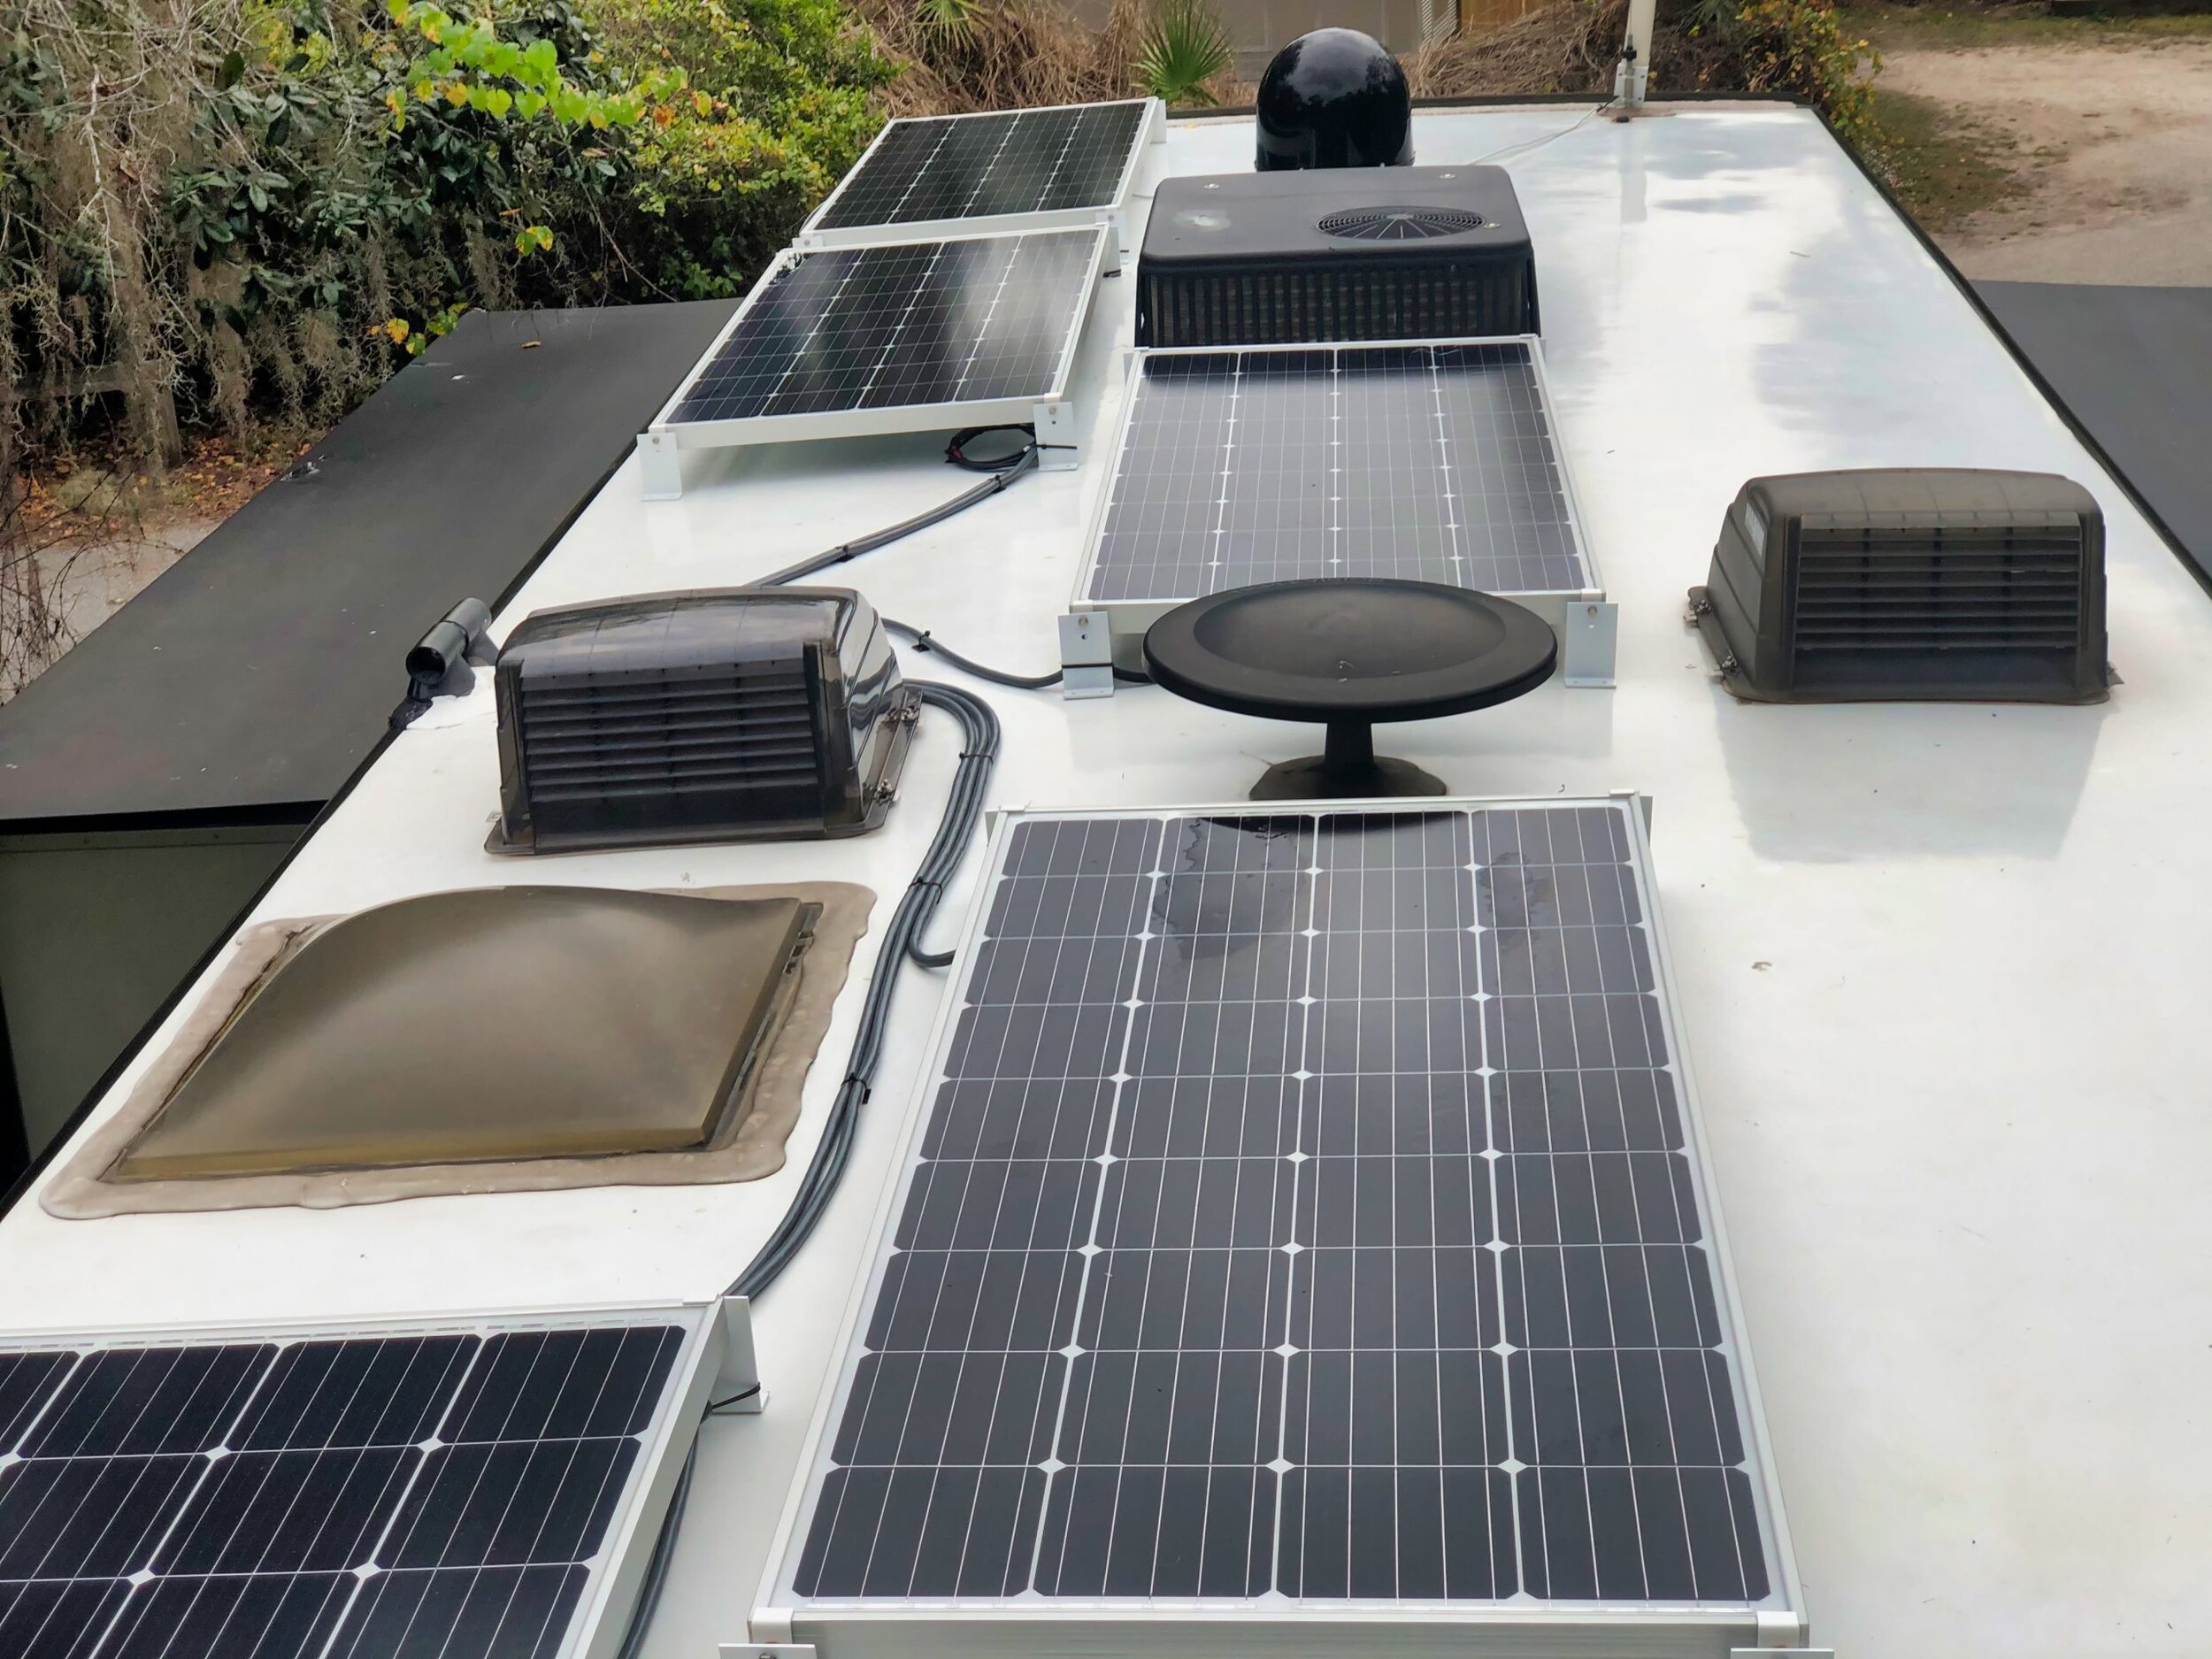 Solar panels to charge rv batteries